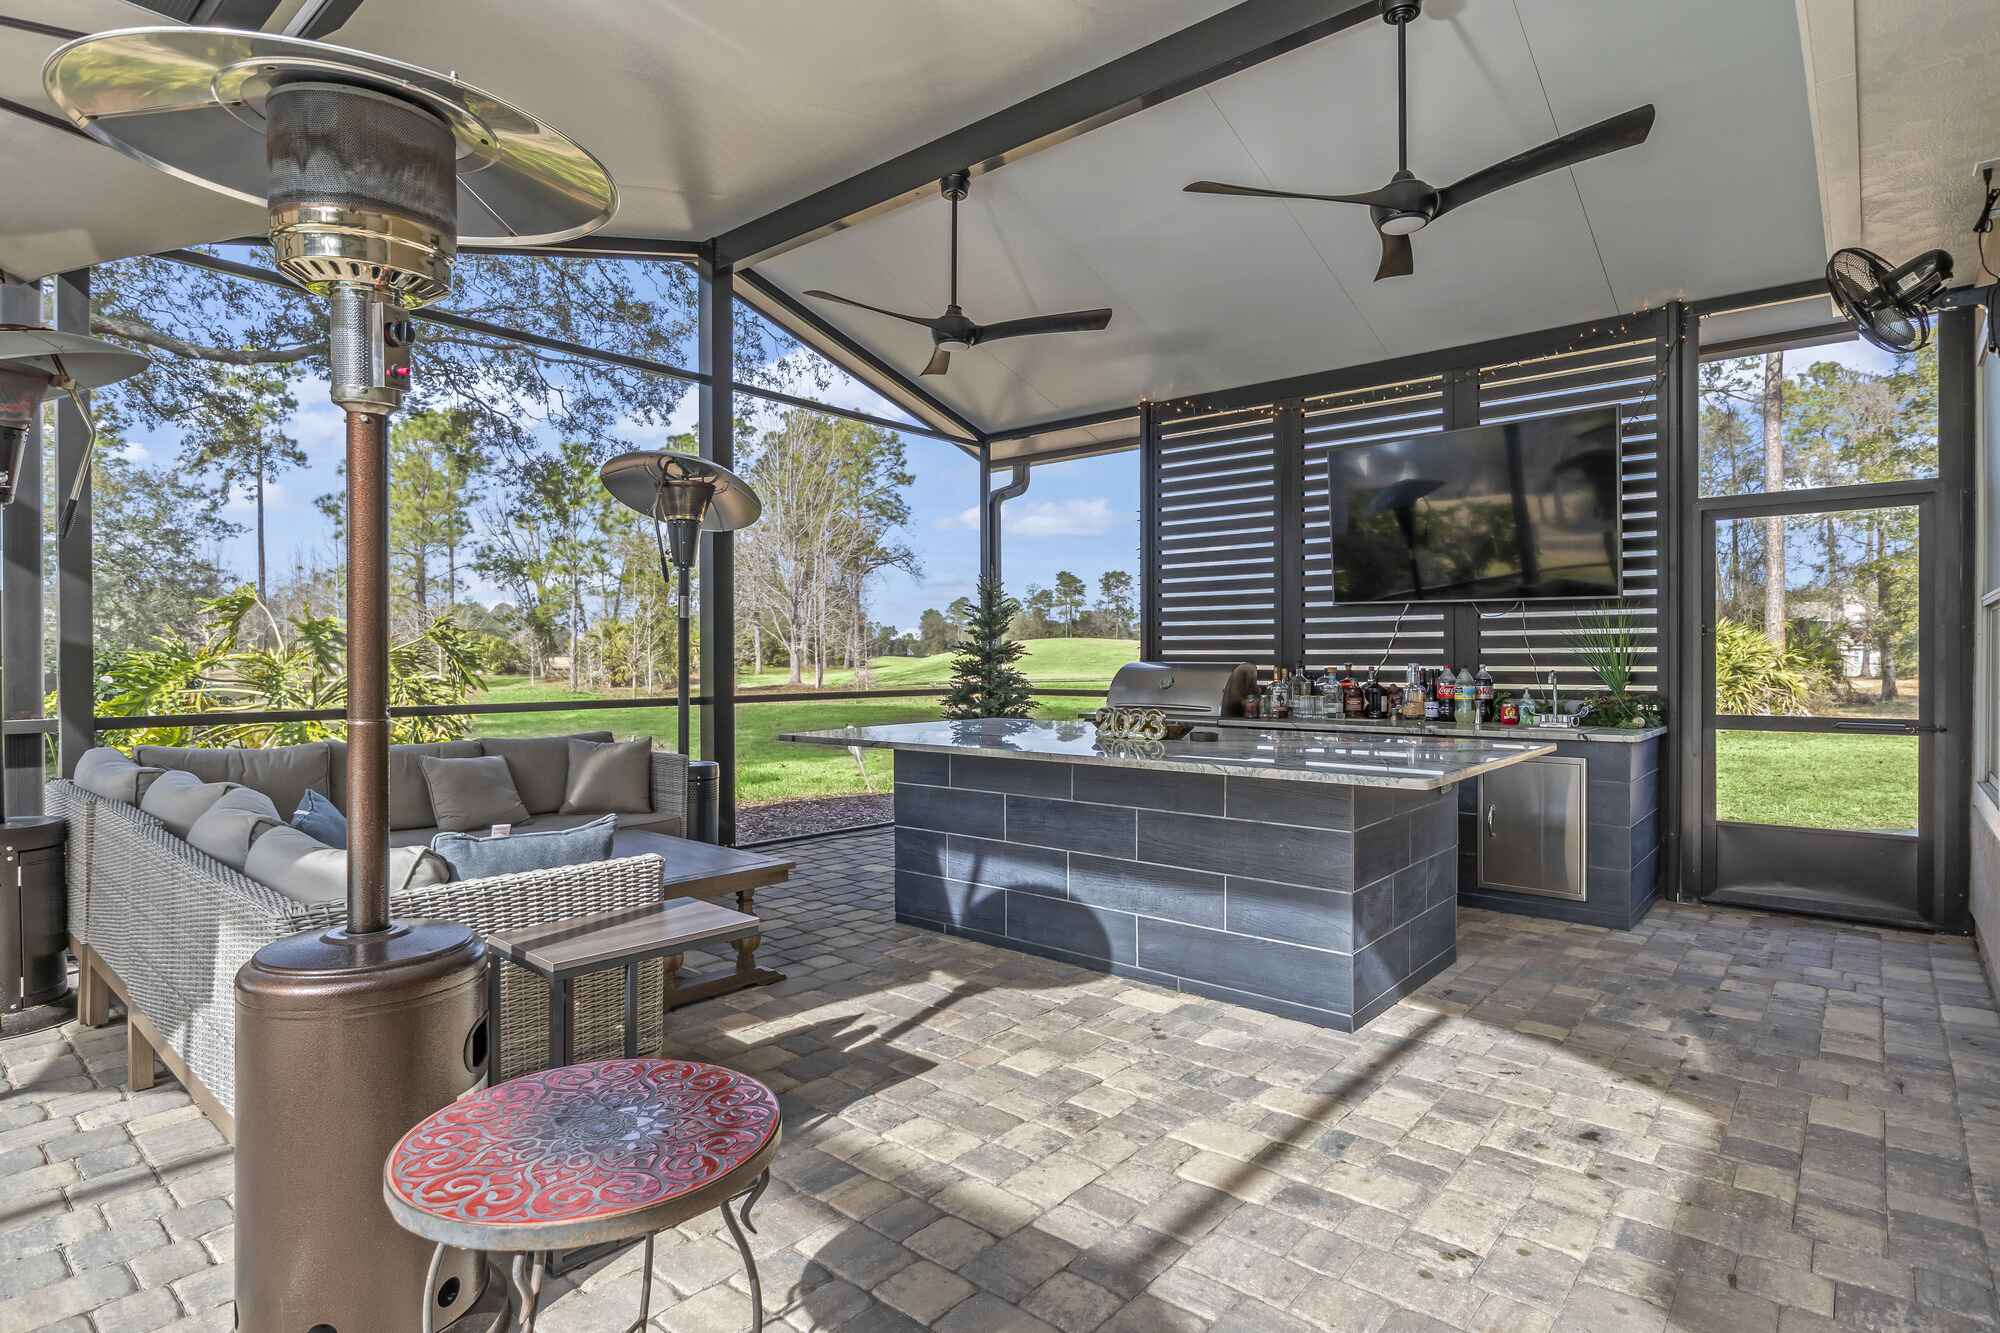 Outdoor Kitchen and Bar inside Screen Room